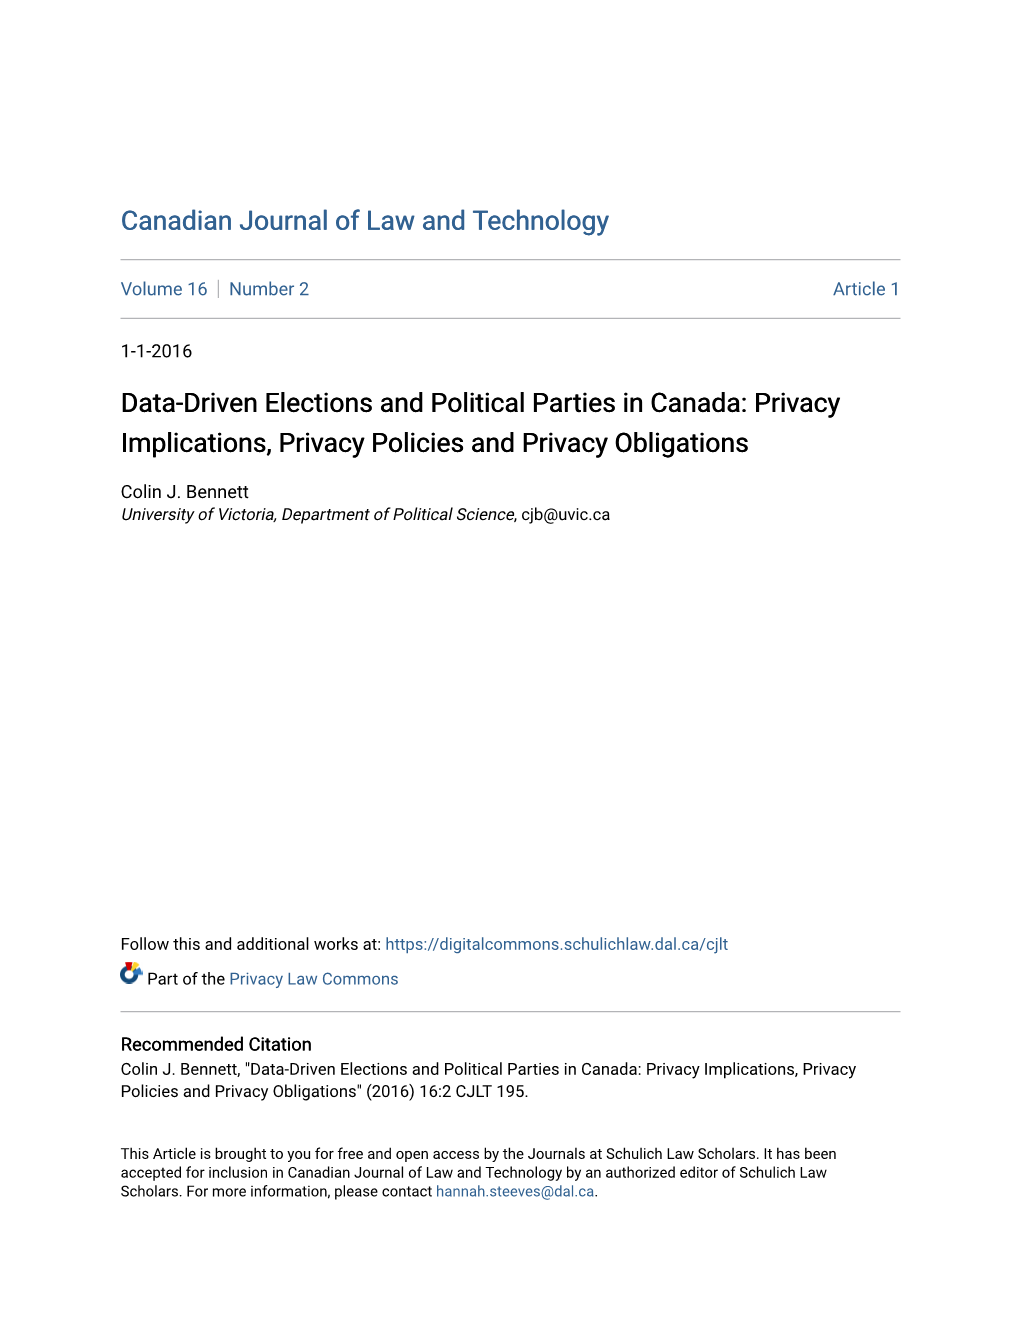 Data-Driven Elections and Political Parties in Canada: Privacy Implications, Privacy Policies and Privacy Obligations